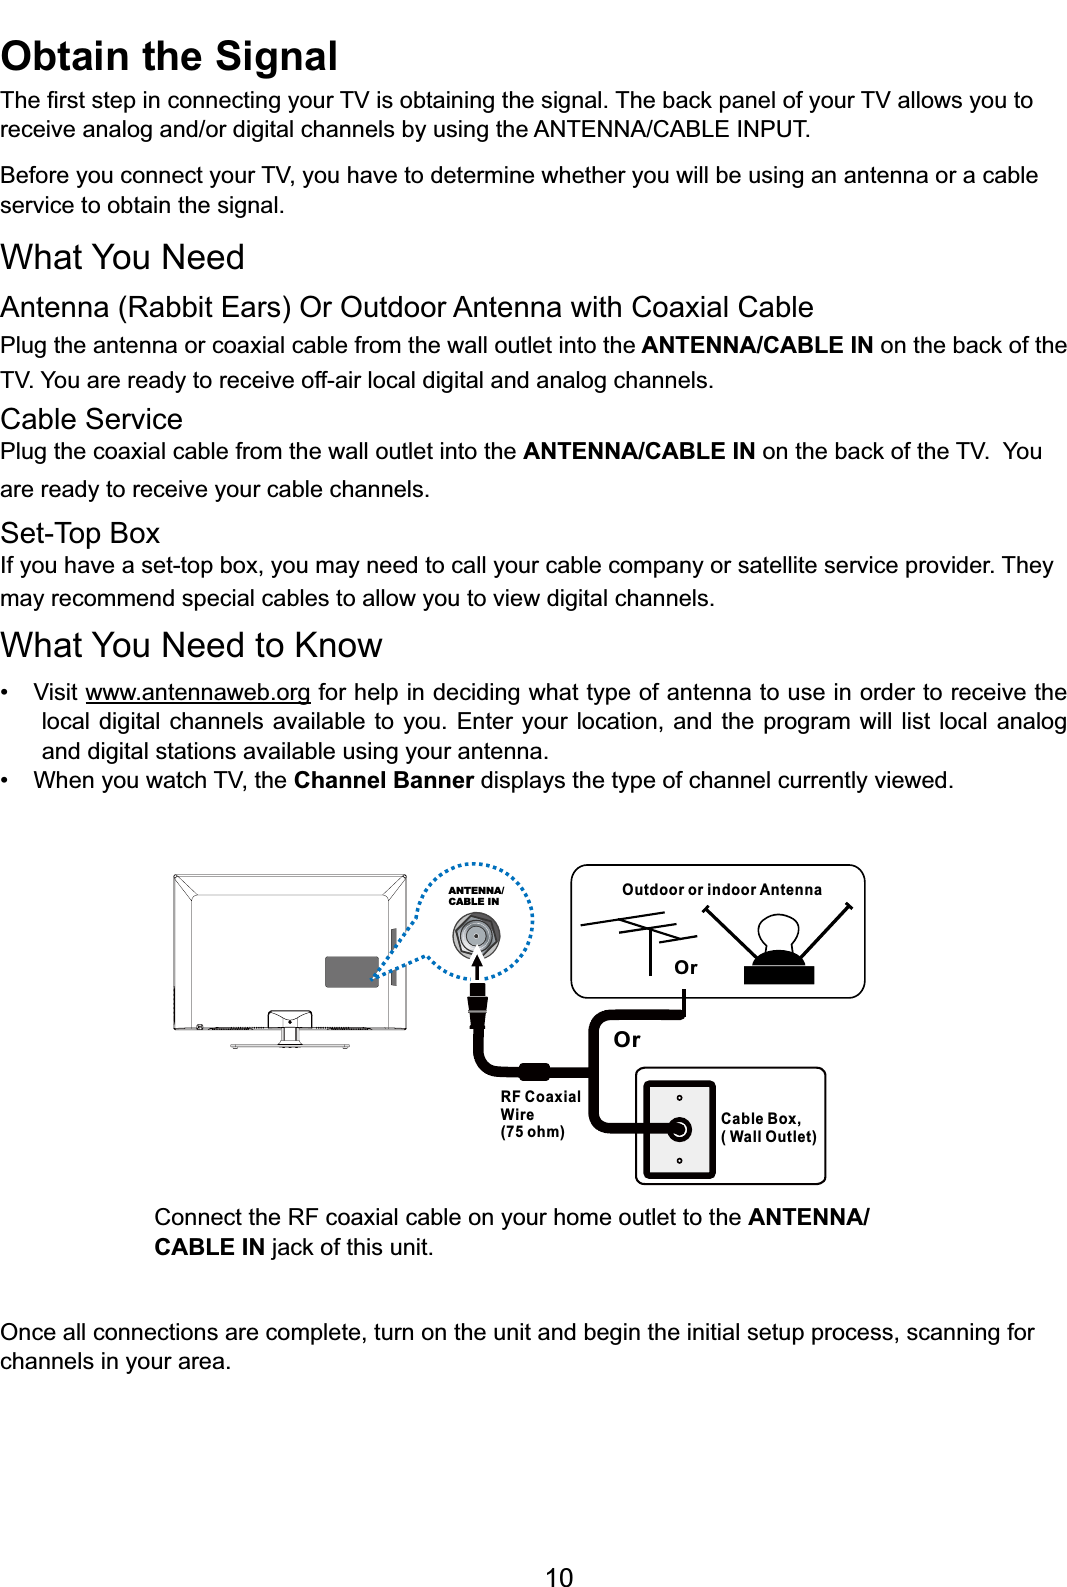 10Outdoor or indoor AntennaCable Box,( Wall Outlet)RF CoaxialWire(75 ohm)OrOrANTENNA/CABLE INConnect the RF coaxial cable on your home outlet to the ANTENNA/CABLE INMDFNRIWKLVXQLWOnce all connections are complete, turn on the unit and begin the initial setup process, scanning for channels in your area. Obtain the Signal7KH¿UVWVWHSLQFRQQHFWLQJ\RXU79LVREWDLQLQJWKHVLJQDO7KHEDFNSDQHORI\RXU79DOORZV\RXWRUHFHLYHDQDORJDQGRUGLJLWDOFKDQQHOVE\XVLQJWKH$17(11$&amp;$%/(,1387%HIRUH\RXFRQQHFW\RXU79\RXKDYHWRGHWHUPLQHZKHWKHU\RXZLOOEHXVLQJDQDQWHQQDRUDFDEOHservice to obtain the signal.What You NeedAntenna (Rabbit Ears) Or Outdoor Antenna with Coaxial CablePlug the antenna or coaxial cable from the wall outlet into the ANTENNA/CABLE INRQWKHEDFNRIthe79&lt;RXDUHUHDG\WRUHFHLYHRIIDLUORFDOGLJLWDODQGDQDORJFKDQQHOVCable ServicePlug the coaxial cable from the wall outlet into the ANTENNA/CABLE INRQWKHEDFNRIWKH79You are ready to receive your cable channels.Set-Top BoxIf you have a set-top box, you may need to call your cable company or satellite service provider. They may recommend special cables to allow you to view digital channels.What You Need to Know 9LVLWwww.antennaweb.org for help in deciding what type of antenna to use in order to receive the local digital channels available to you. Enter your location, and the program will list local analog and digital stations available using your antenna. :KHQ\RXZDWFK79WKHChannel Banner displays the type of channel currently viewed.